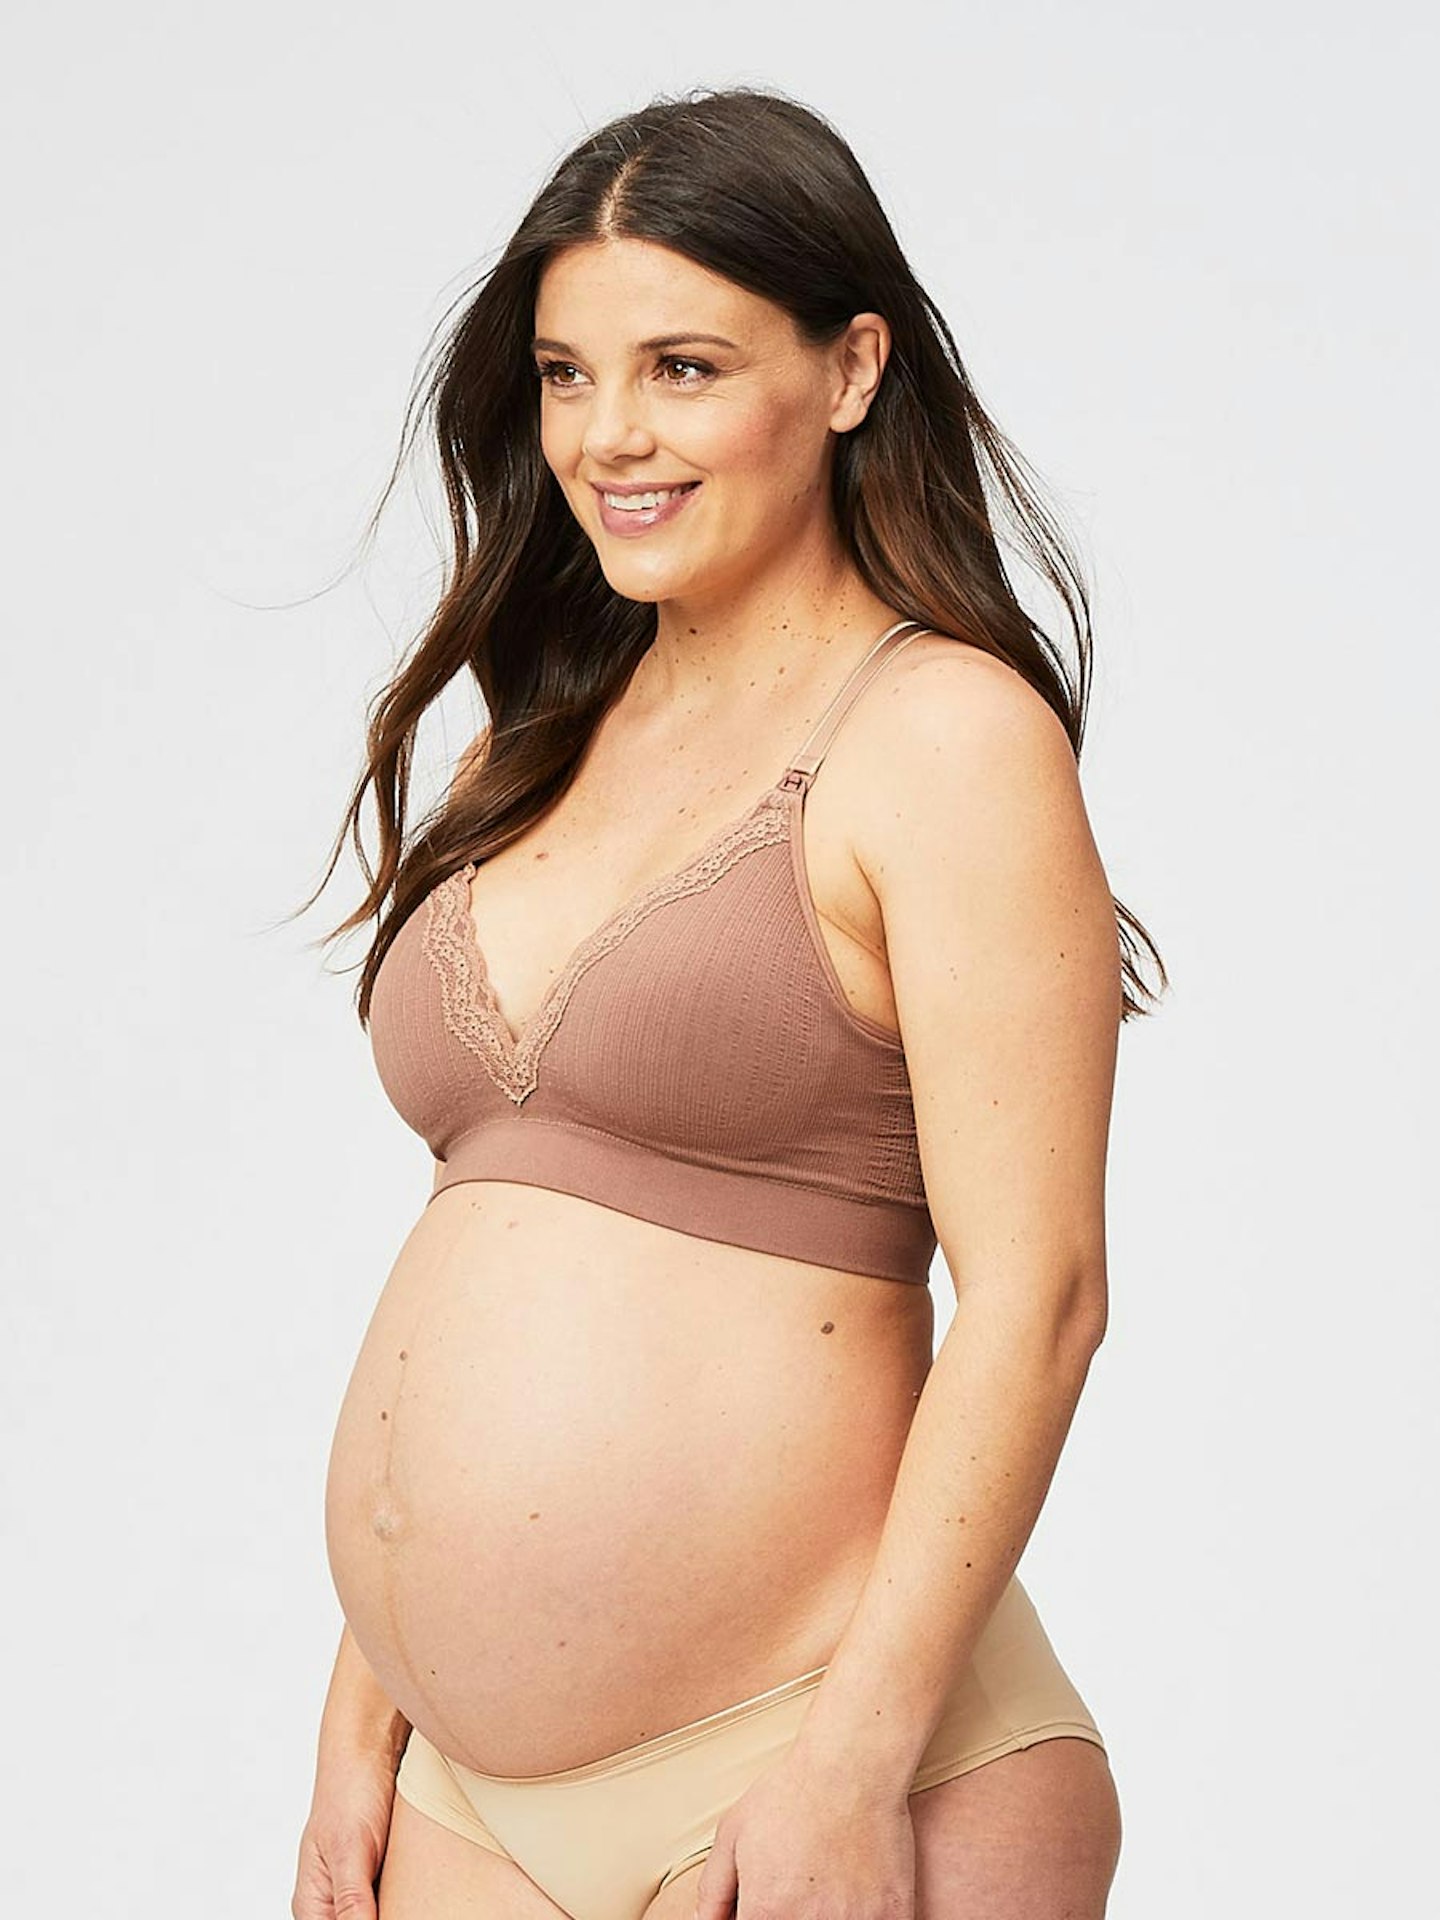 The Best Maternity & Nursing Bras For Your Changing Breasts - Best